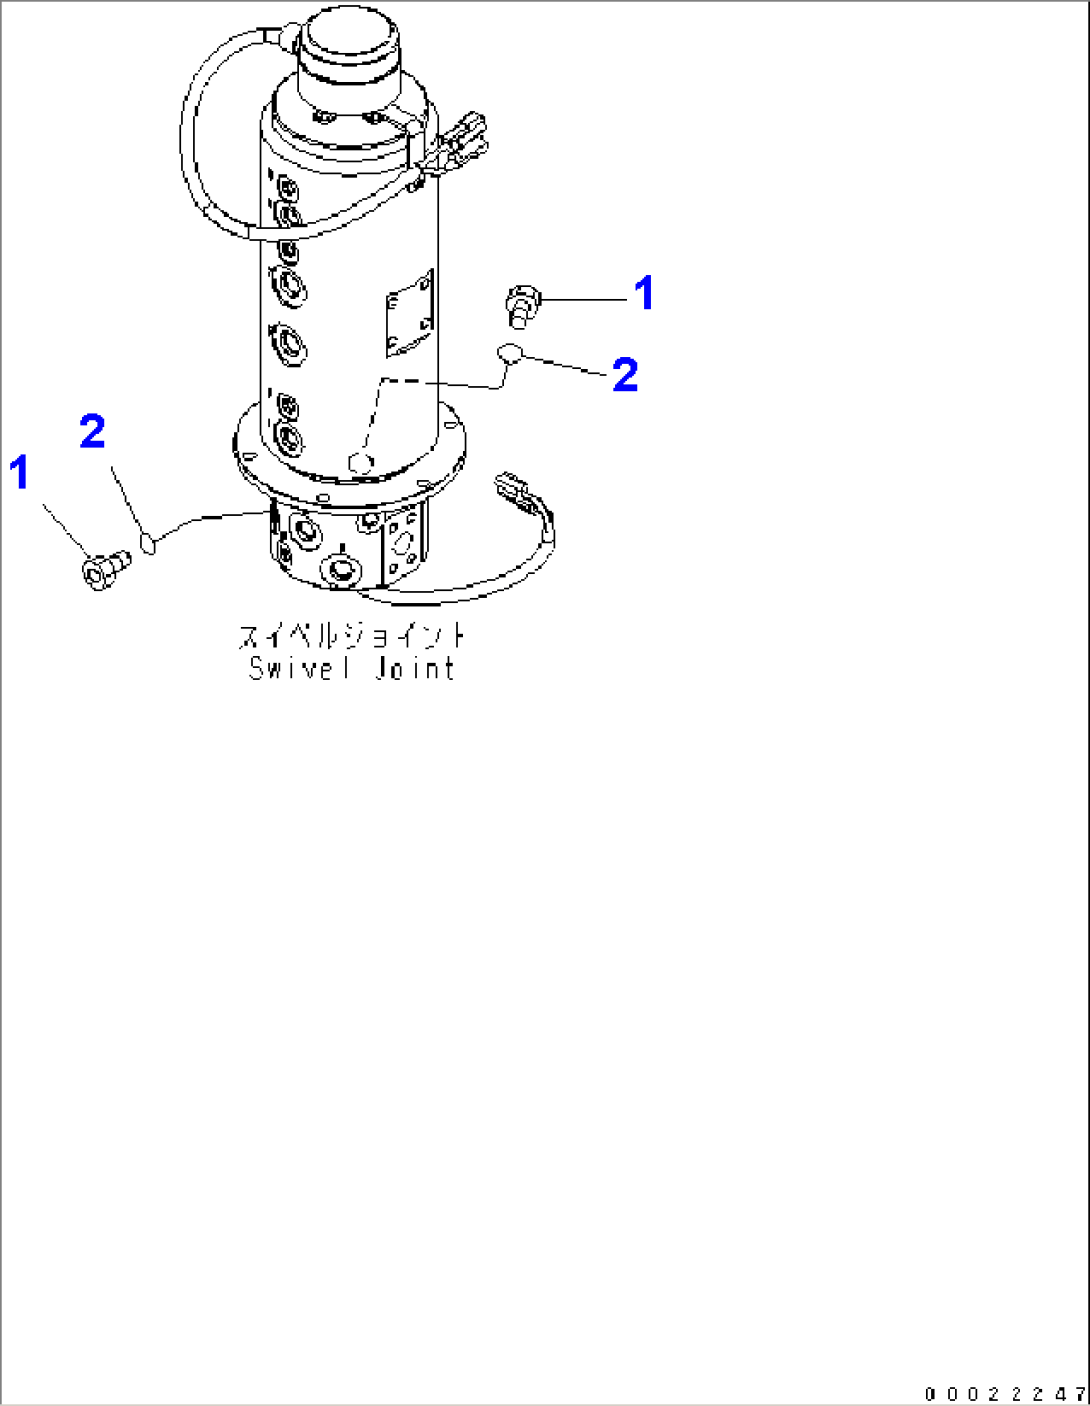 UNDER ATTACHMENT PIPING (SWIVEL JOINT ATTACHING PARTS) (ATTACHMENT LESS)